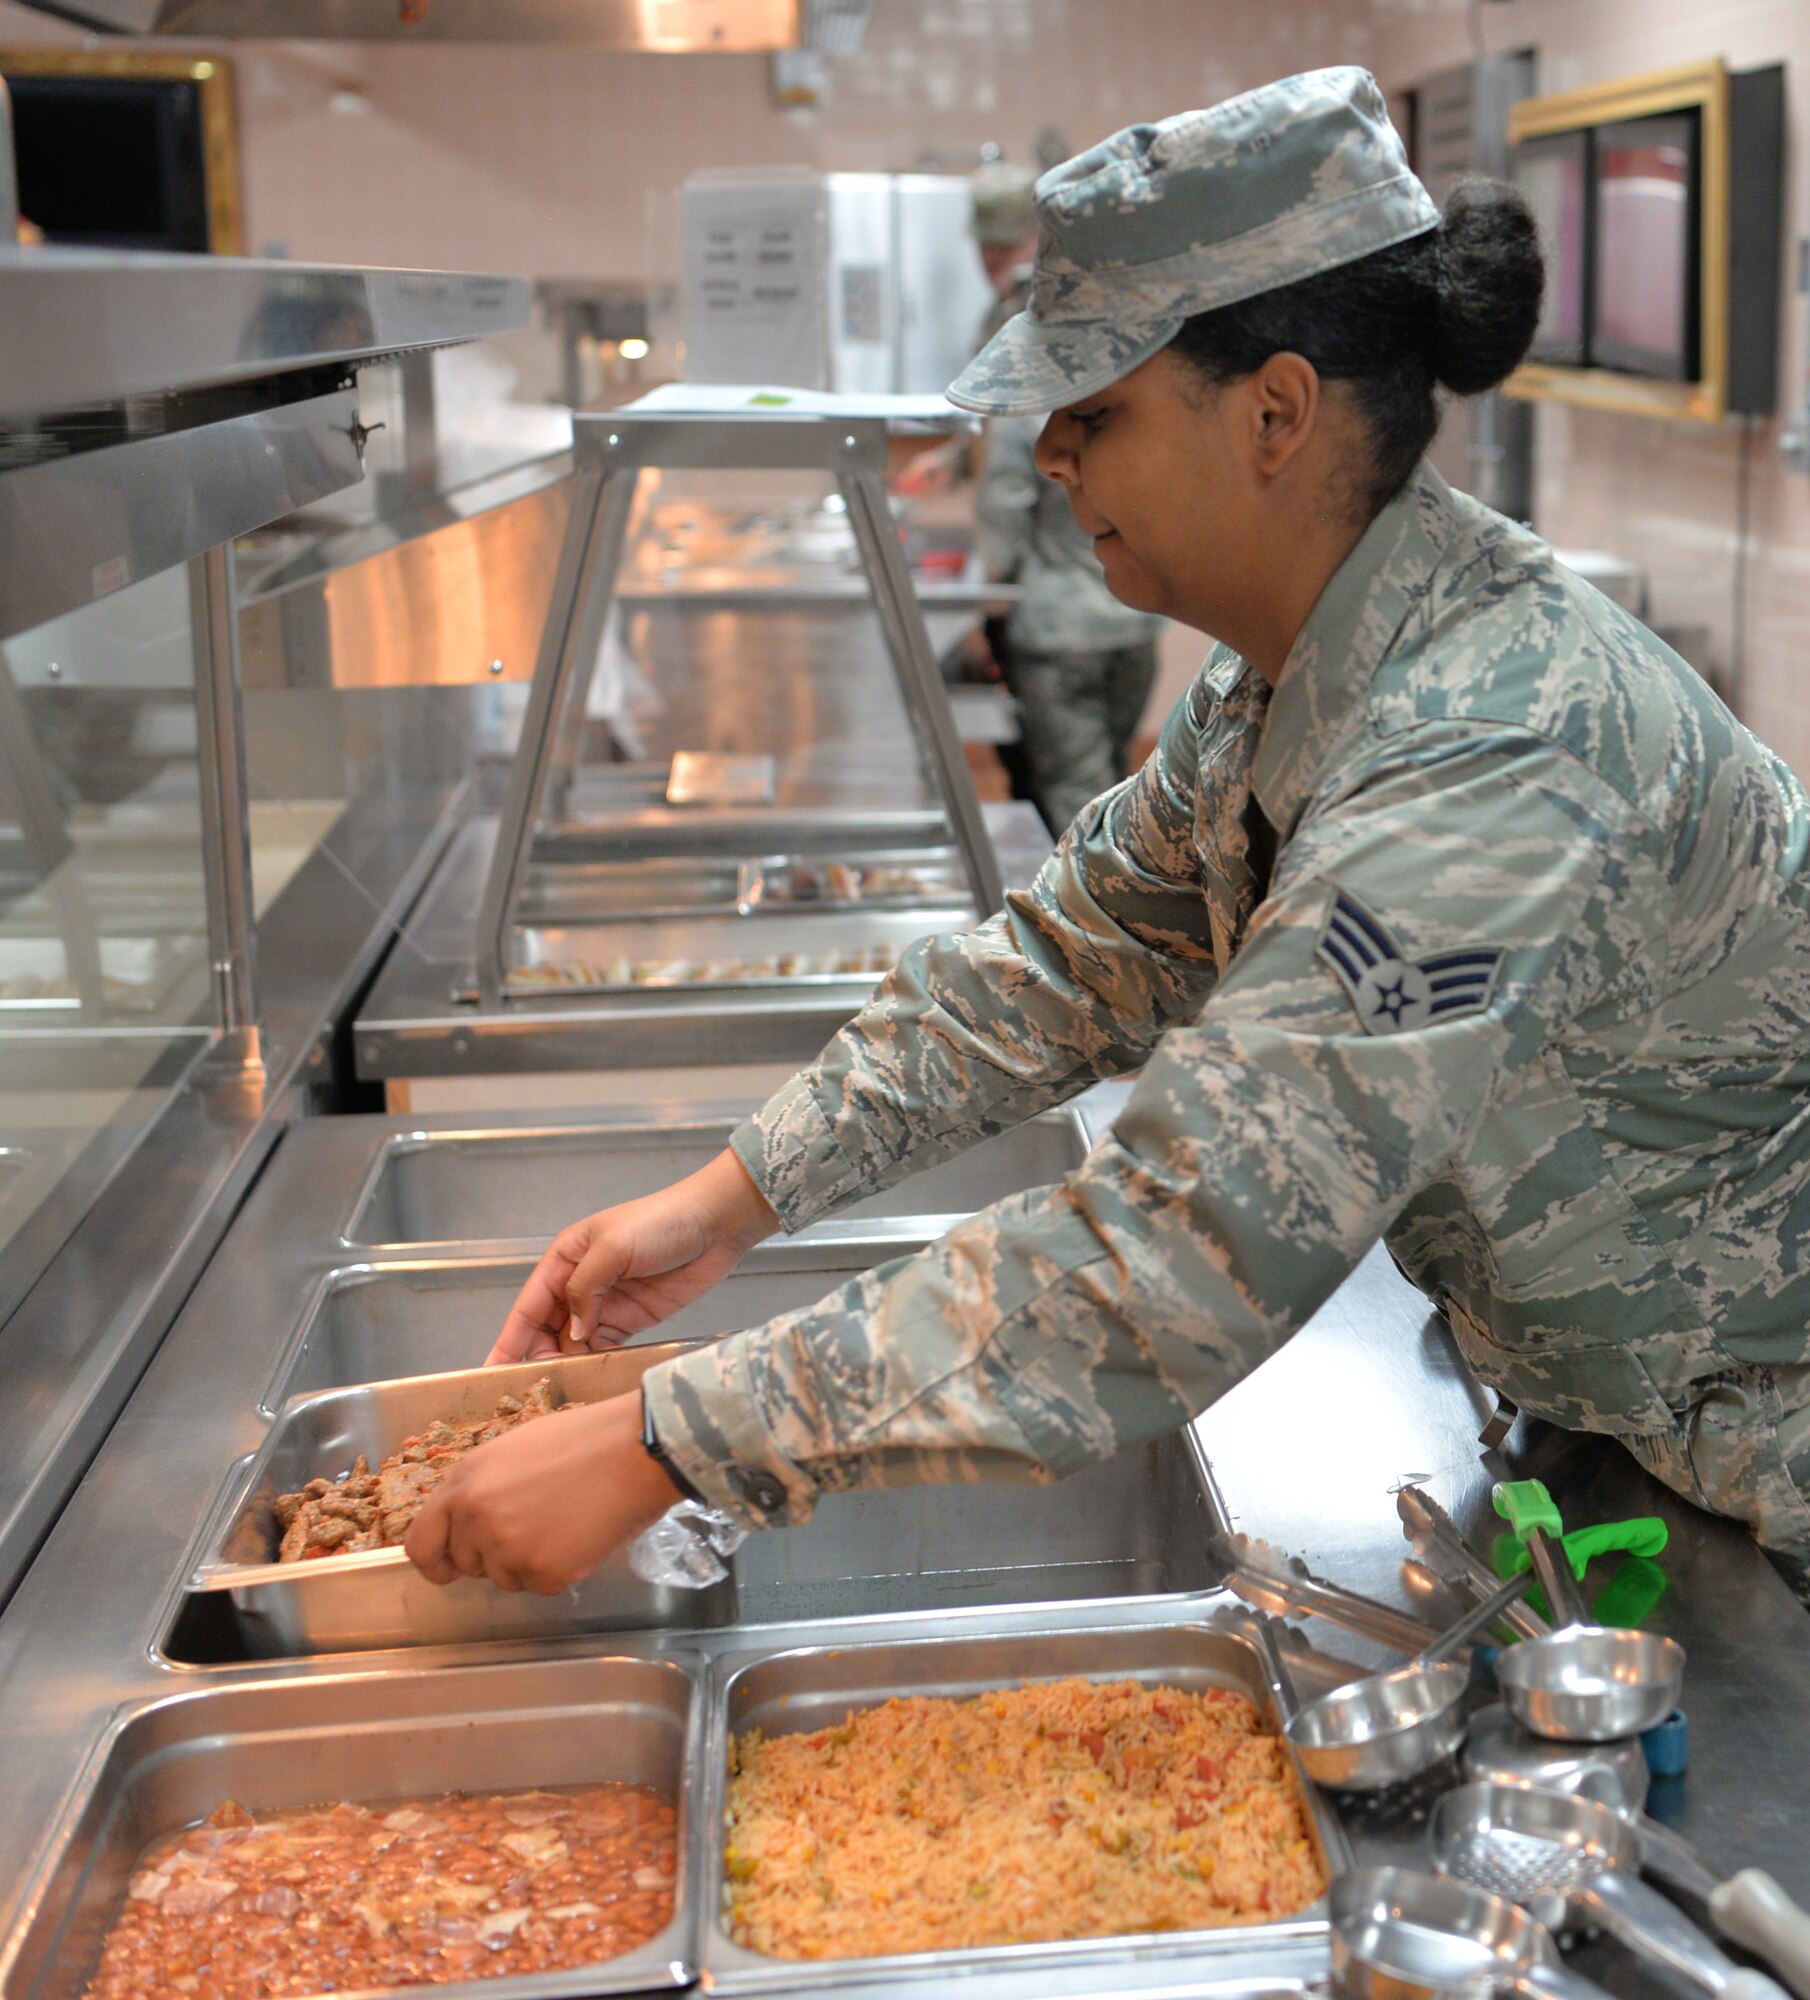 Senior Airman Tati-Anna Thomas, 926th Force Support Squadron food service journeyman, prepares lunch for service members during Red Flag 19-3 at Nellis Air Force Base, Nev., July 18, 2019. Red Flag is a combat training exercise designed to expose pilots to their first 10 “combat missions," allowing them to be more confident and effective in real-world combat. (U.S. Air Force photo by Tech. Sgt. Bryan Magee)